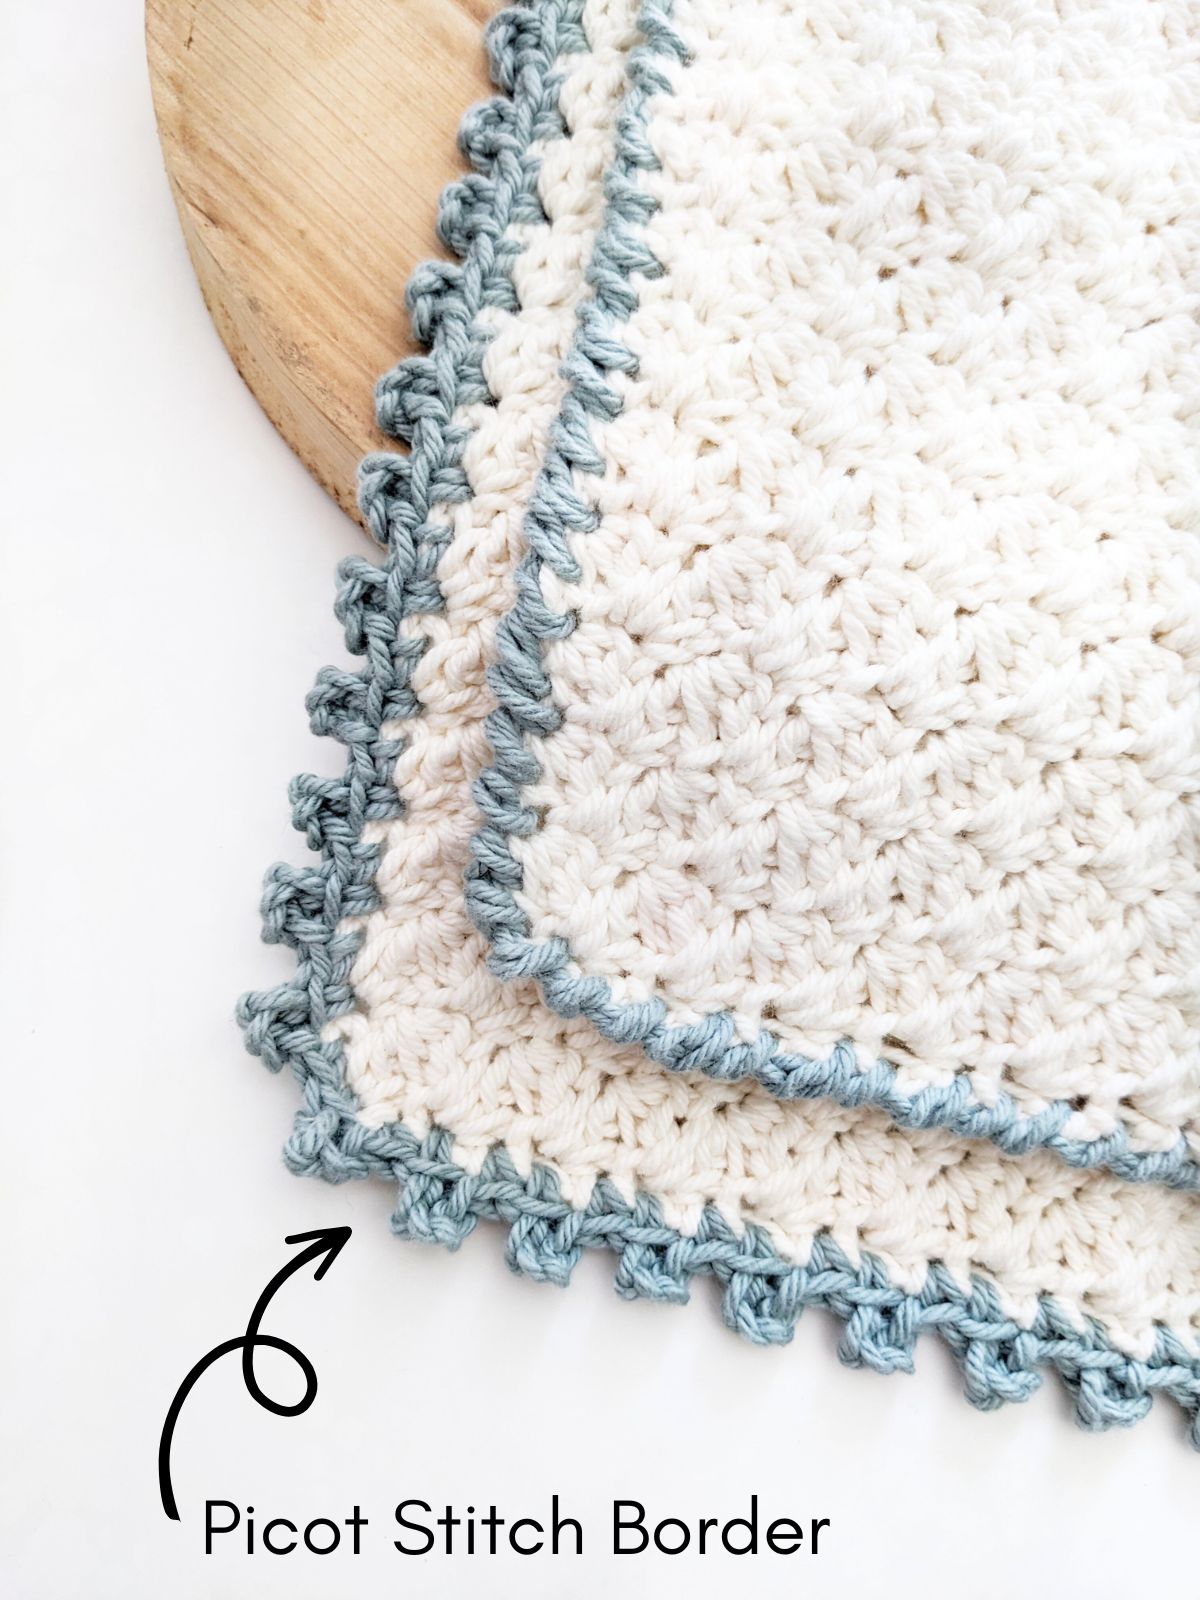 A cotton crochet washcloth with a picot stitch edging.